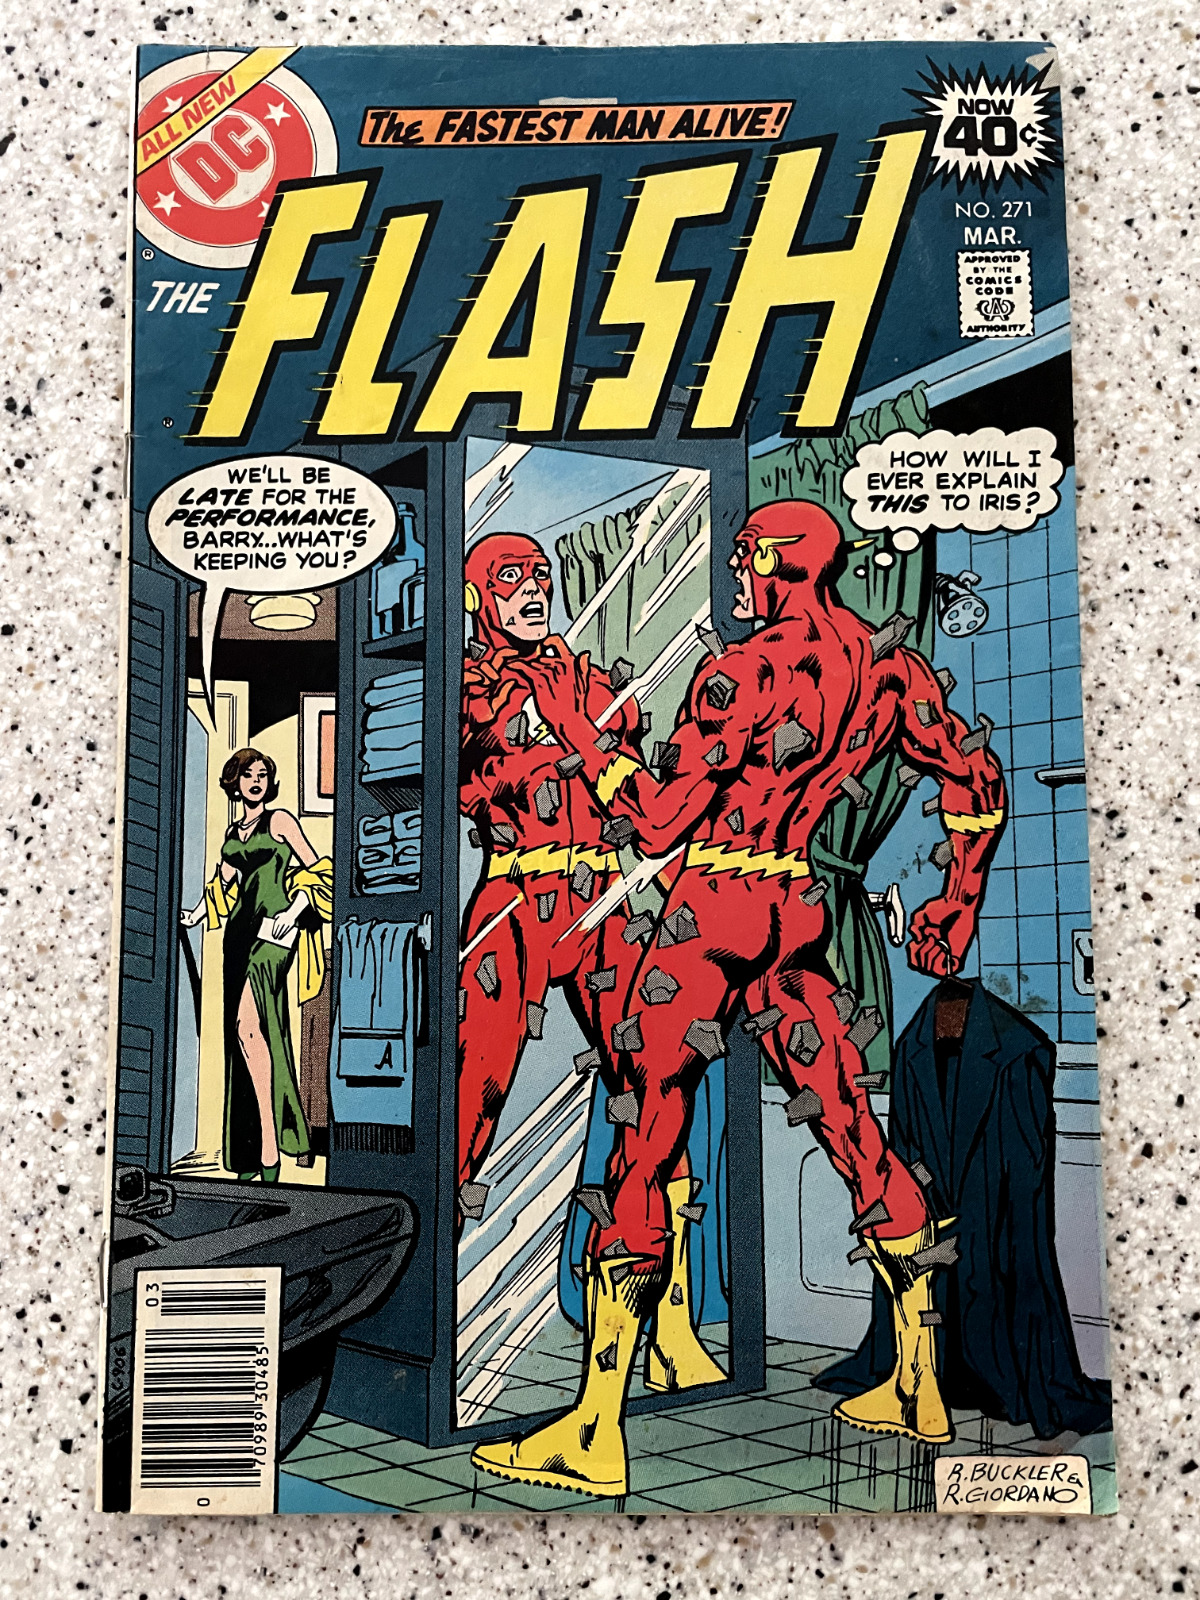 The Flash #271 - The Clown, Clive Yorkin Pt.2